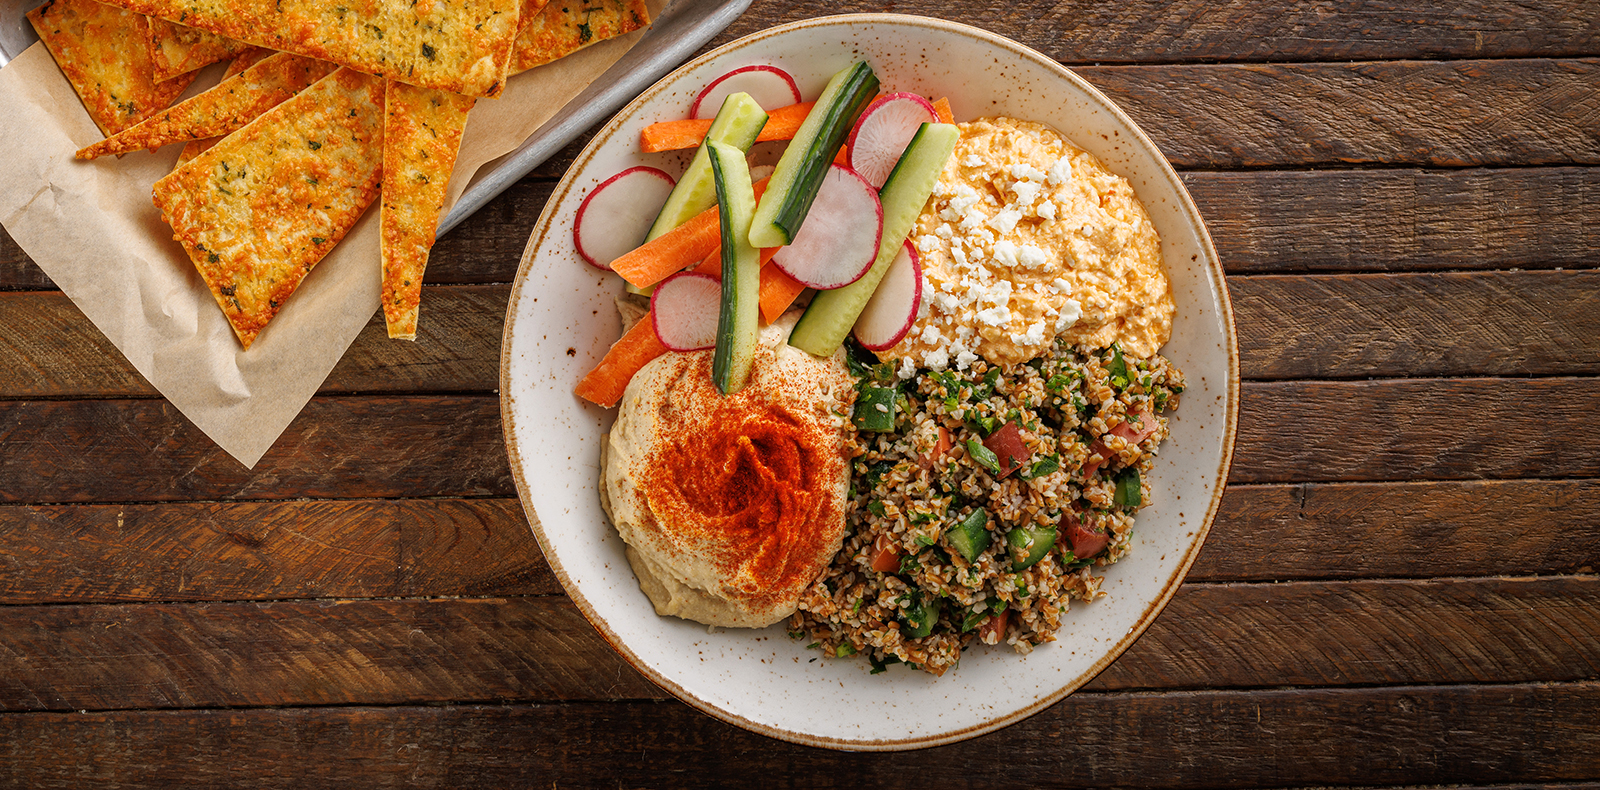 Hummus, spicy feta dip, tabbouleh grains, veggies + lavash garlic chips. Also available on the happy hour and late-night happy hour menus